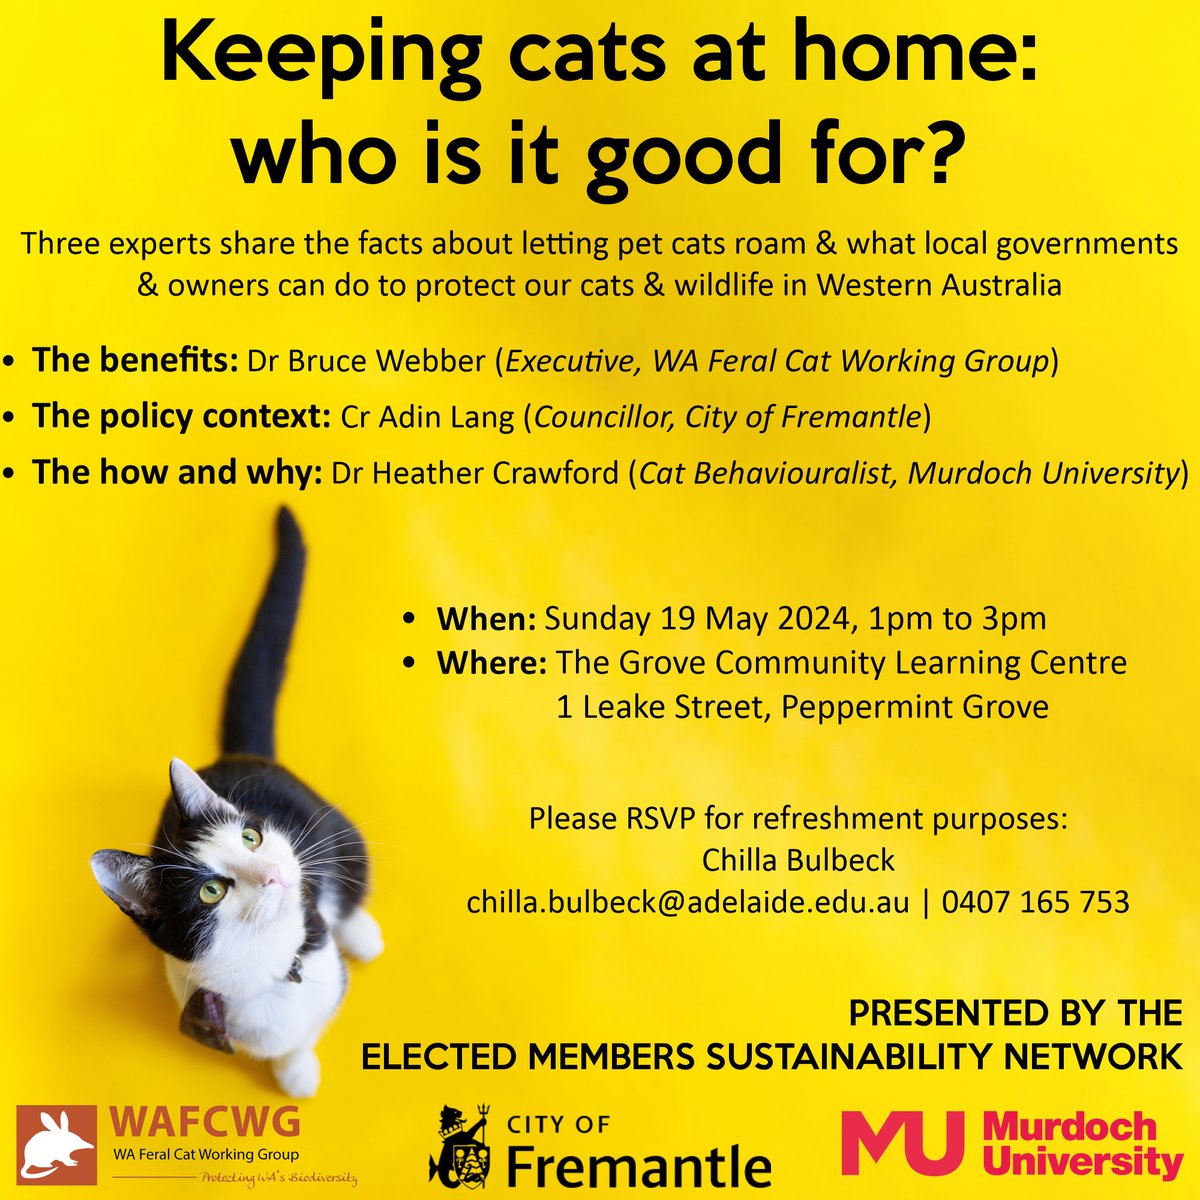 Come and hear the latest updates on the benefits for keeping pet cats safe at home. We will cover the benefits, policy context, and the how and why of responsible pet cat ownership. Details in the flyer below (please RSVP). #petcats #safeathome #responsiblepetownership #cats